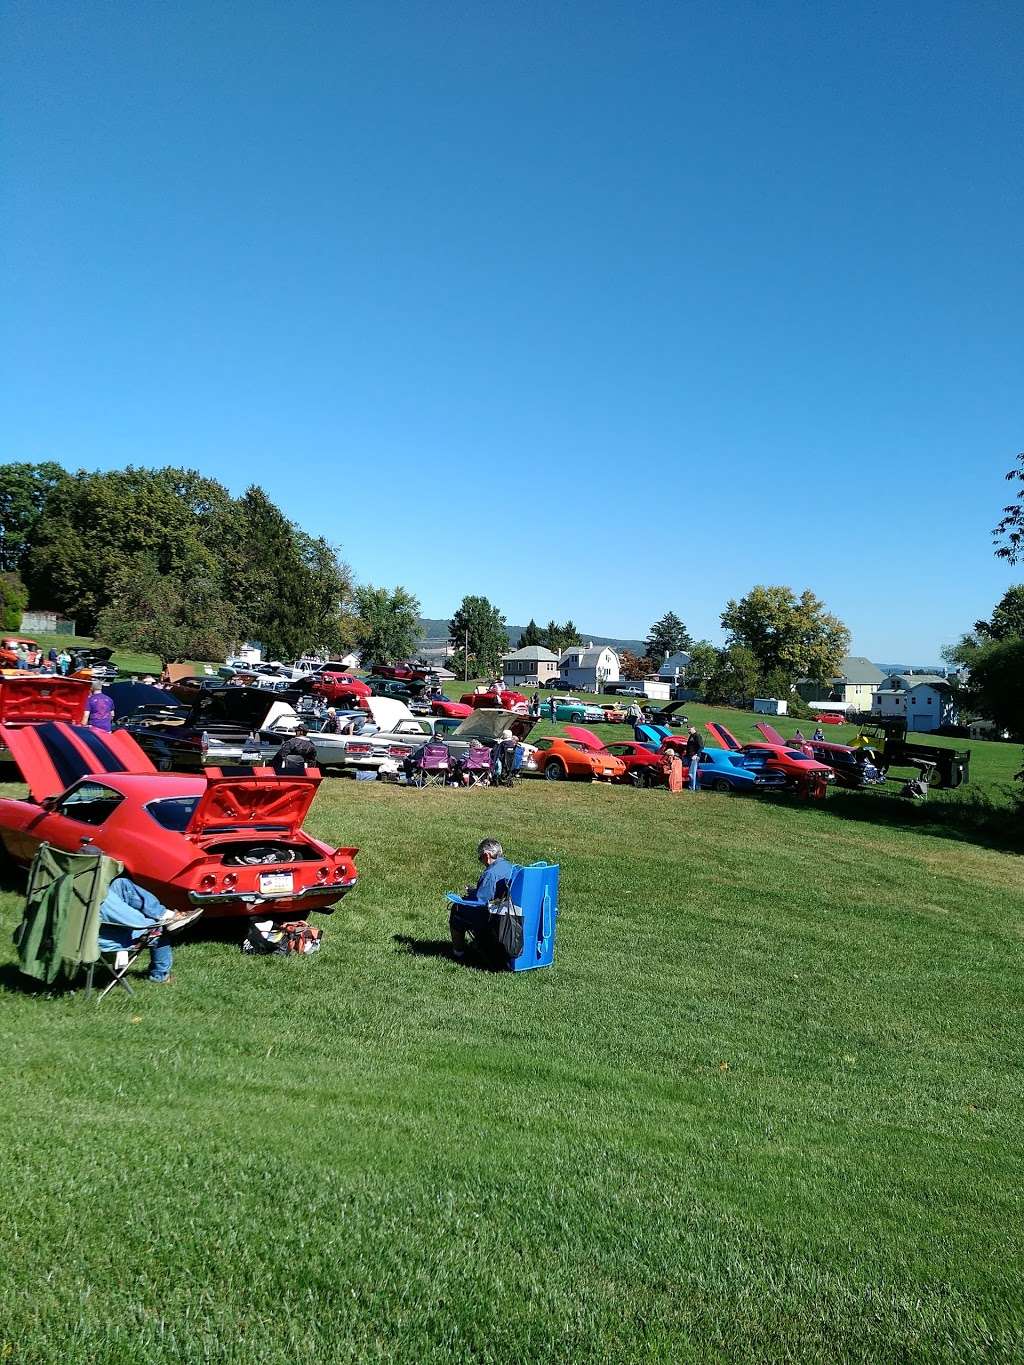 Annual Holy Child Car Show | Old Newport St, Nanticoke, PA 18634